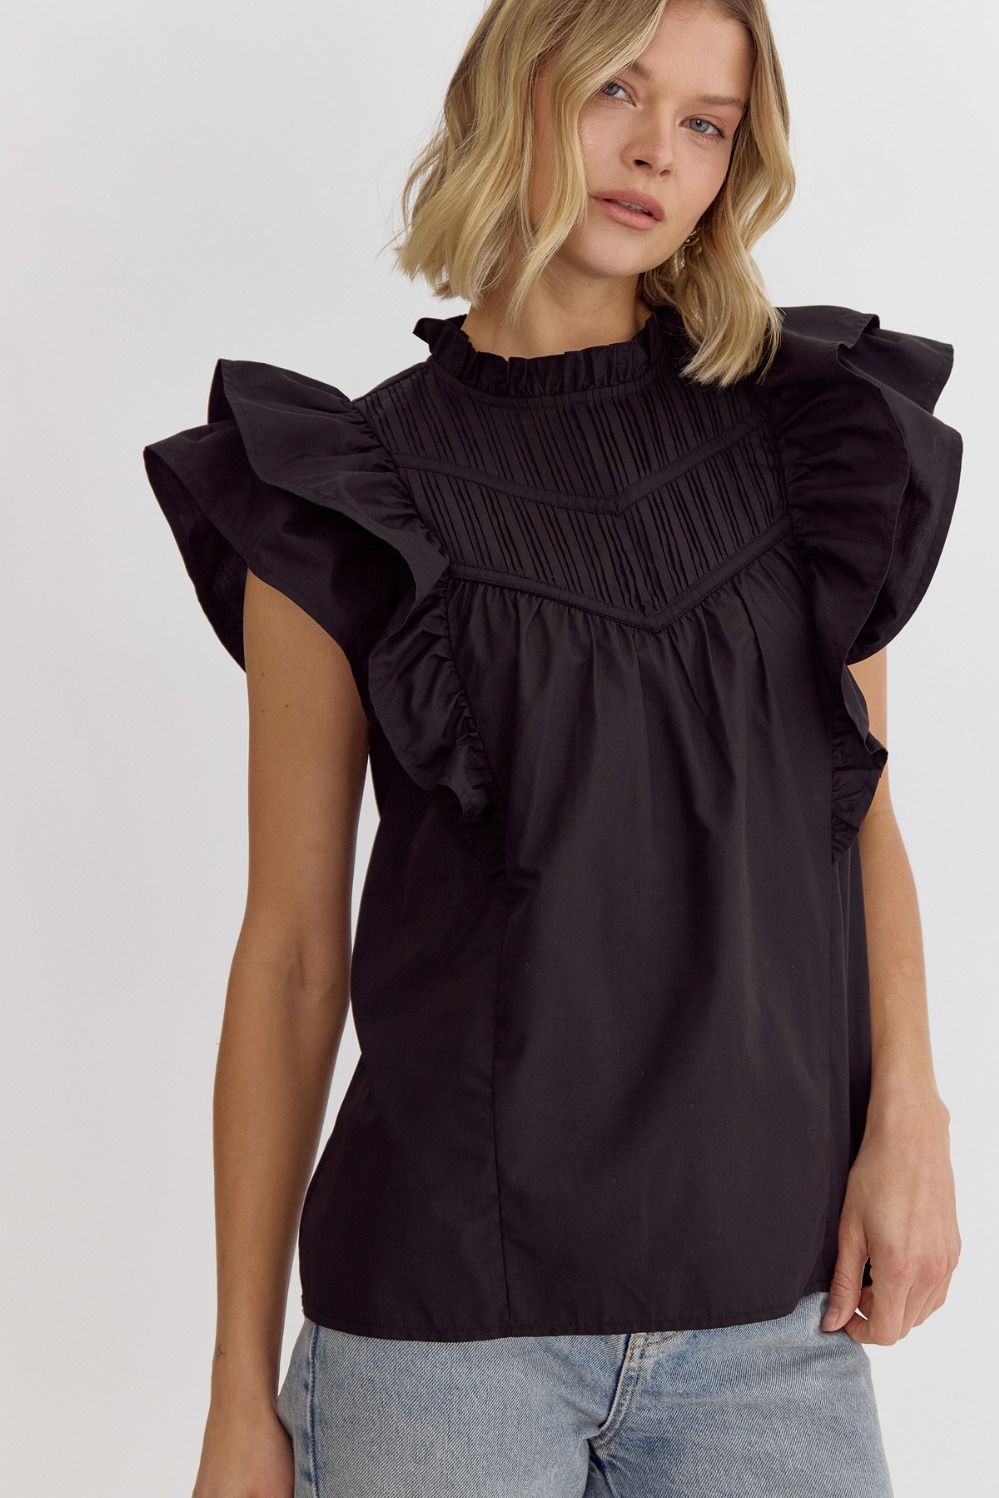 For The Frill Of It Top